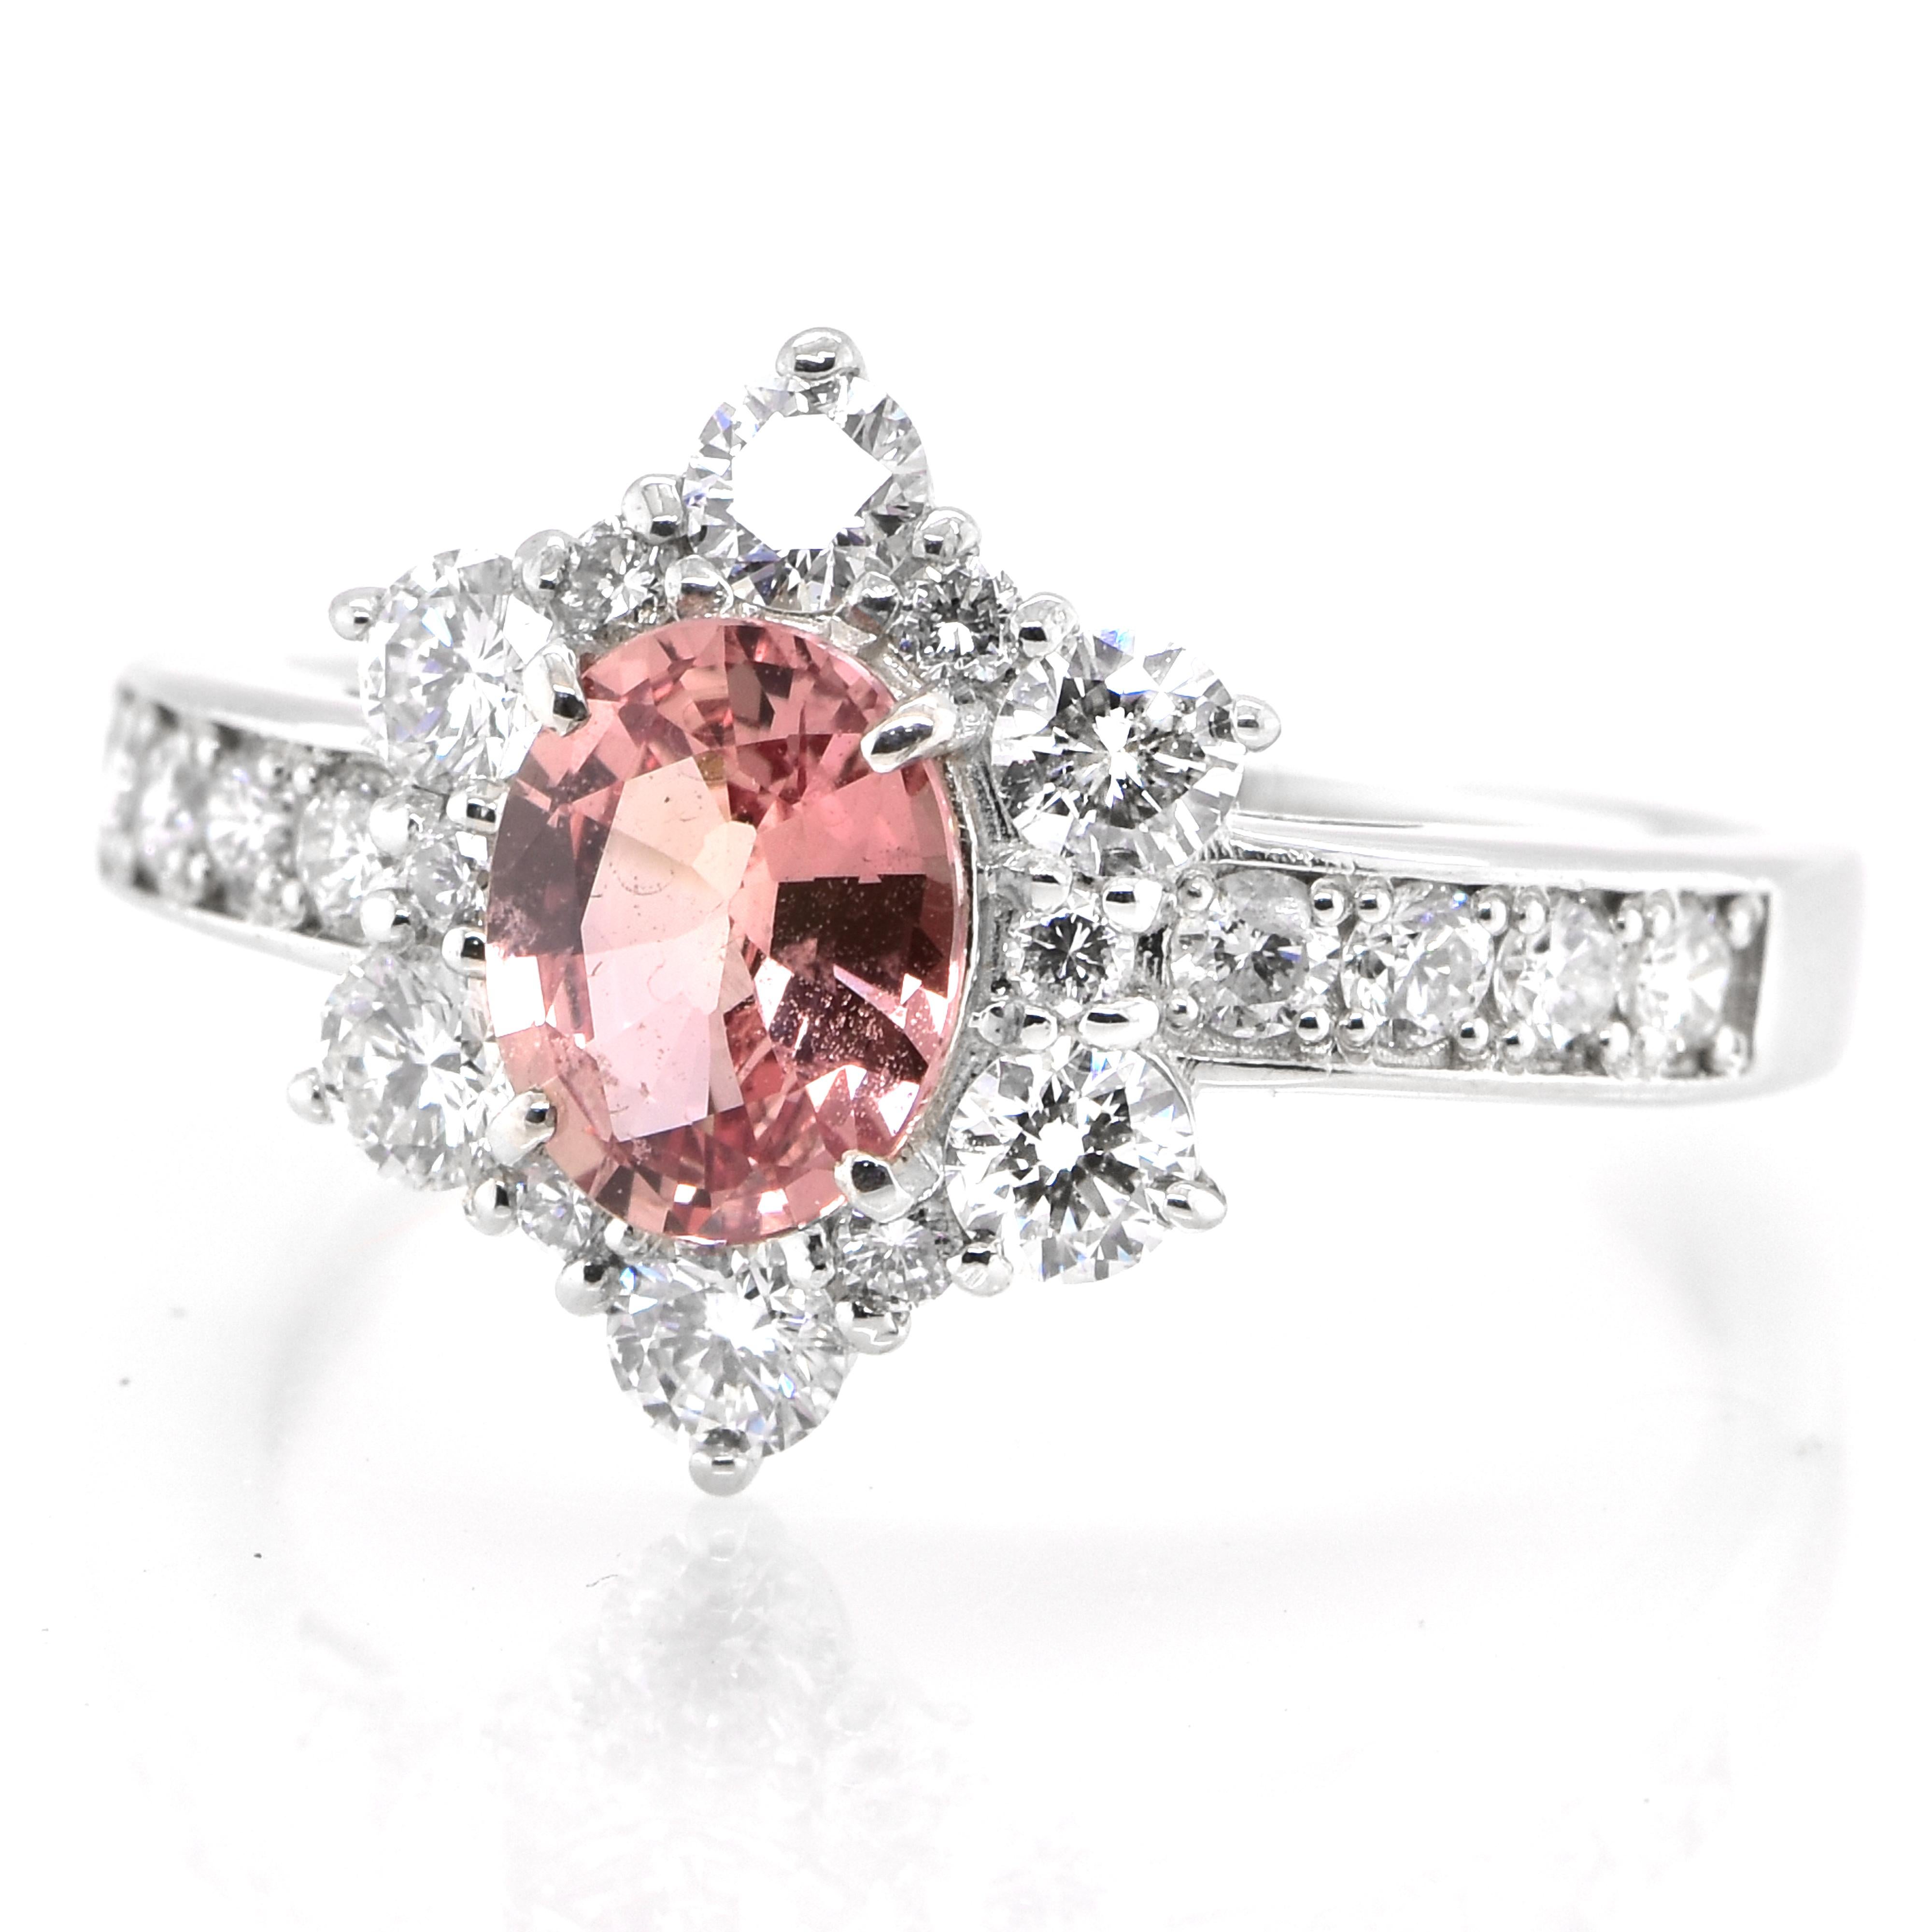 A beautiful ring featuring GIA Certified 0.99 Carat Natural Padparadscha Sapphire and 0.76 Carats of Diamond Accents set in Platinum. Sapphires have extraordinary durability - they excel in hardness as well as toughness and durability making them